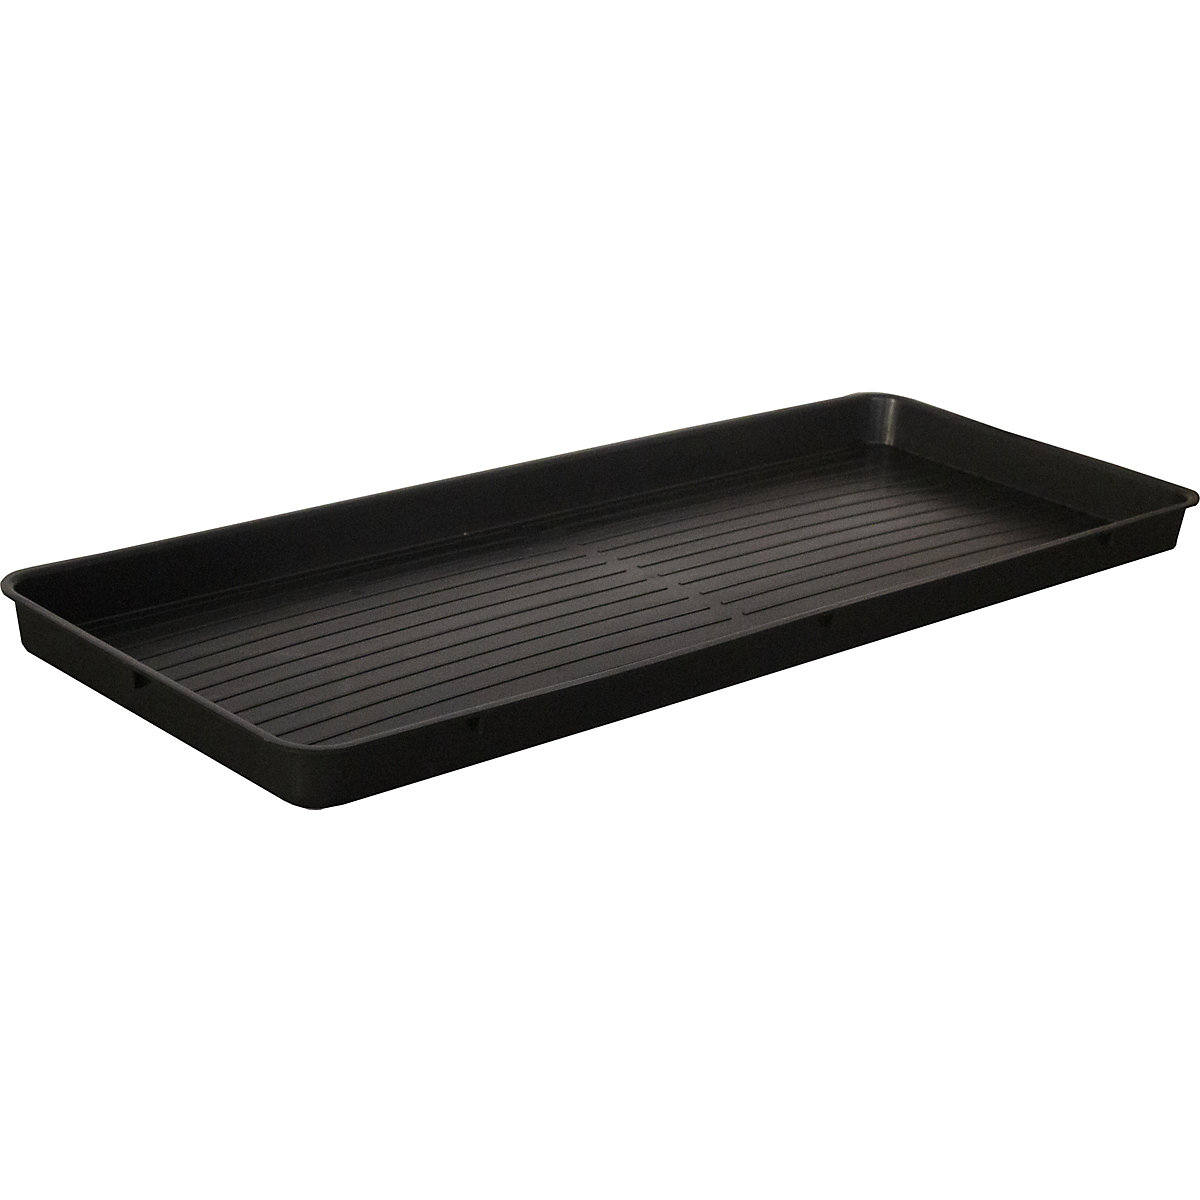 PE sump tray for small containers - eurokraft basic